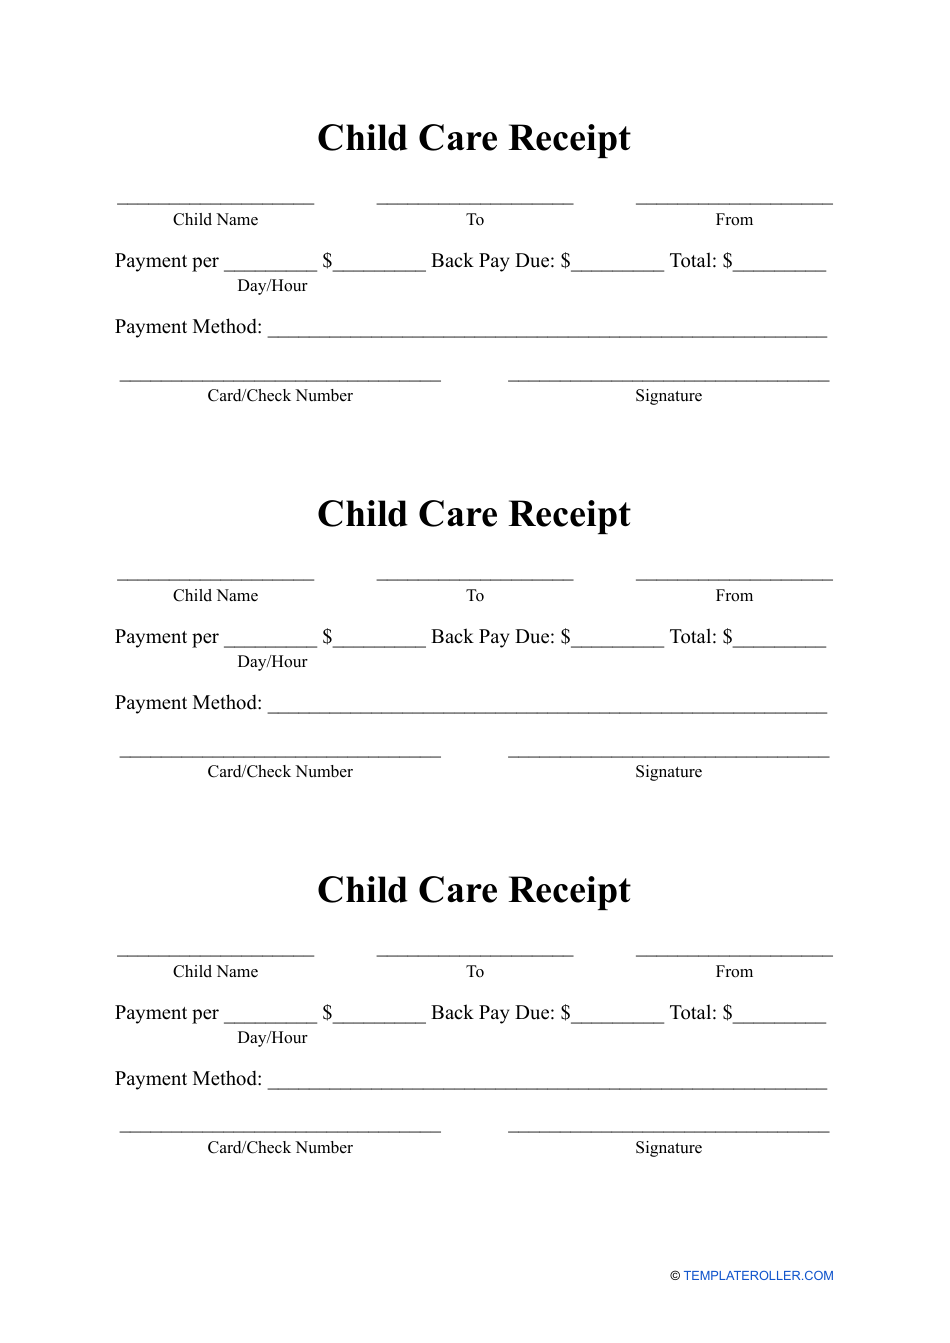 child care receipt template download printable pdf